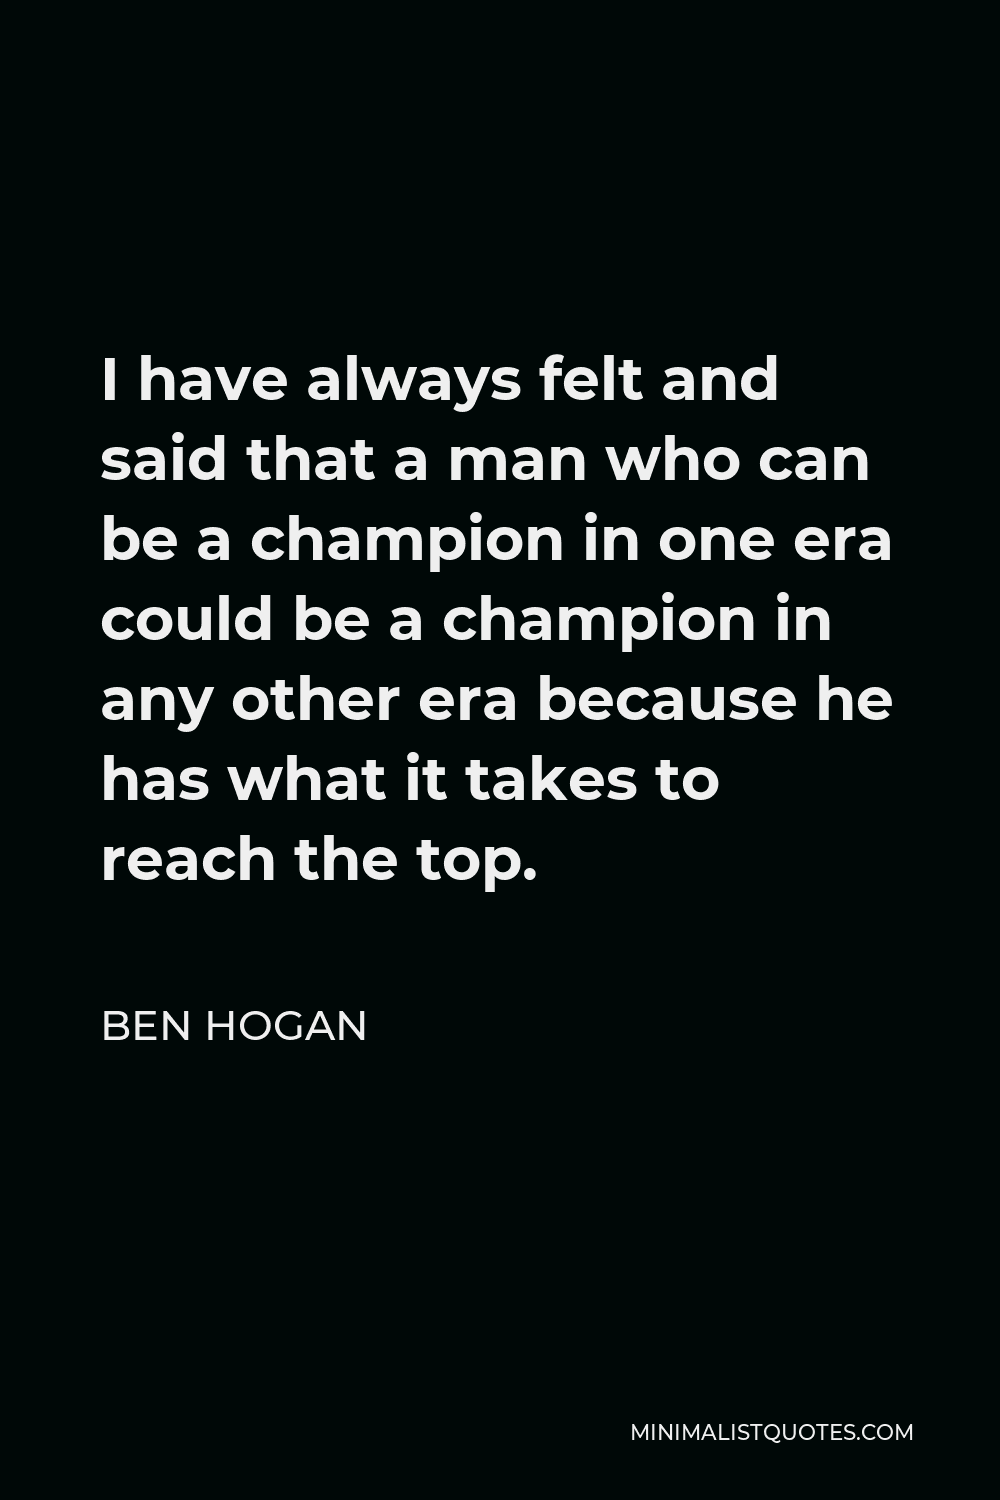 Ben Hogan Quote - I have always felt and said that a man who can be a champion in one era could be a champion in any other era because he has what it takes to reach the top.